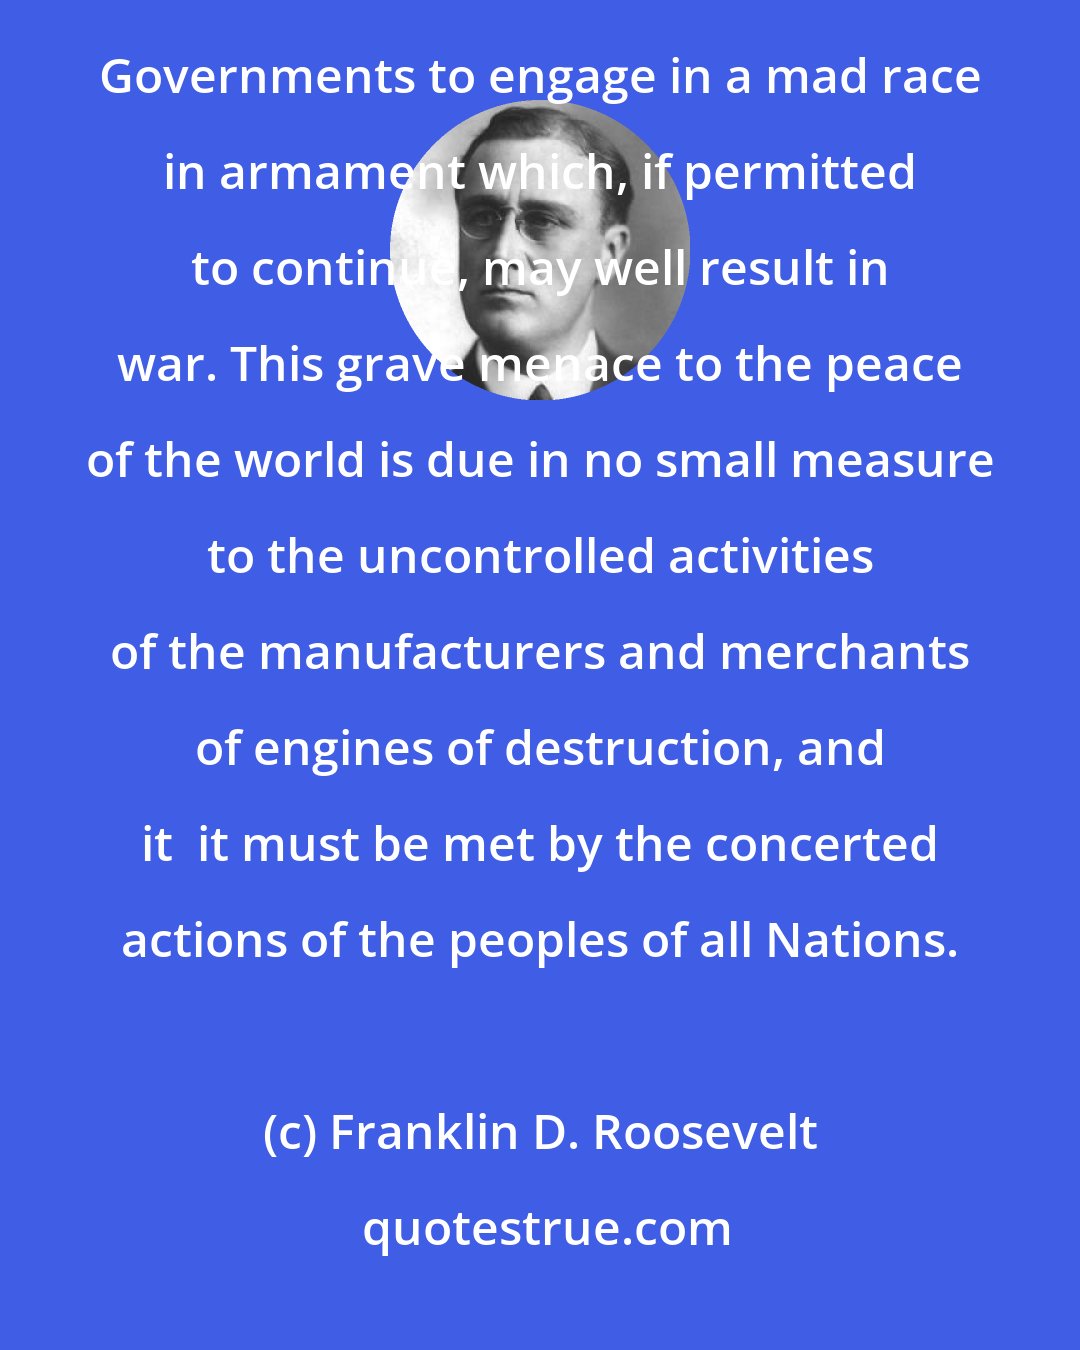 Franklin D. Roosevelt: The peoples of many countries are being taxed to the point of poverty and starvation in order to enable Governments to engage in a mad race in armament which, if permitted to continue, may well result in war. This grave menace to the peace of the world is due in no small measure to the uncontrolled activities of the manufacturers and merchants of engines of destruction, and it  it must be met by the concerted actions of the peoples of all Nations.